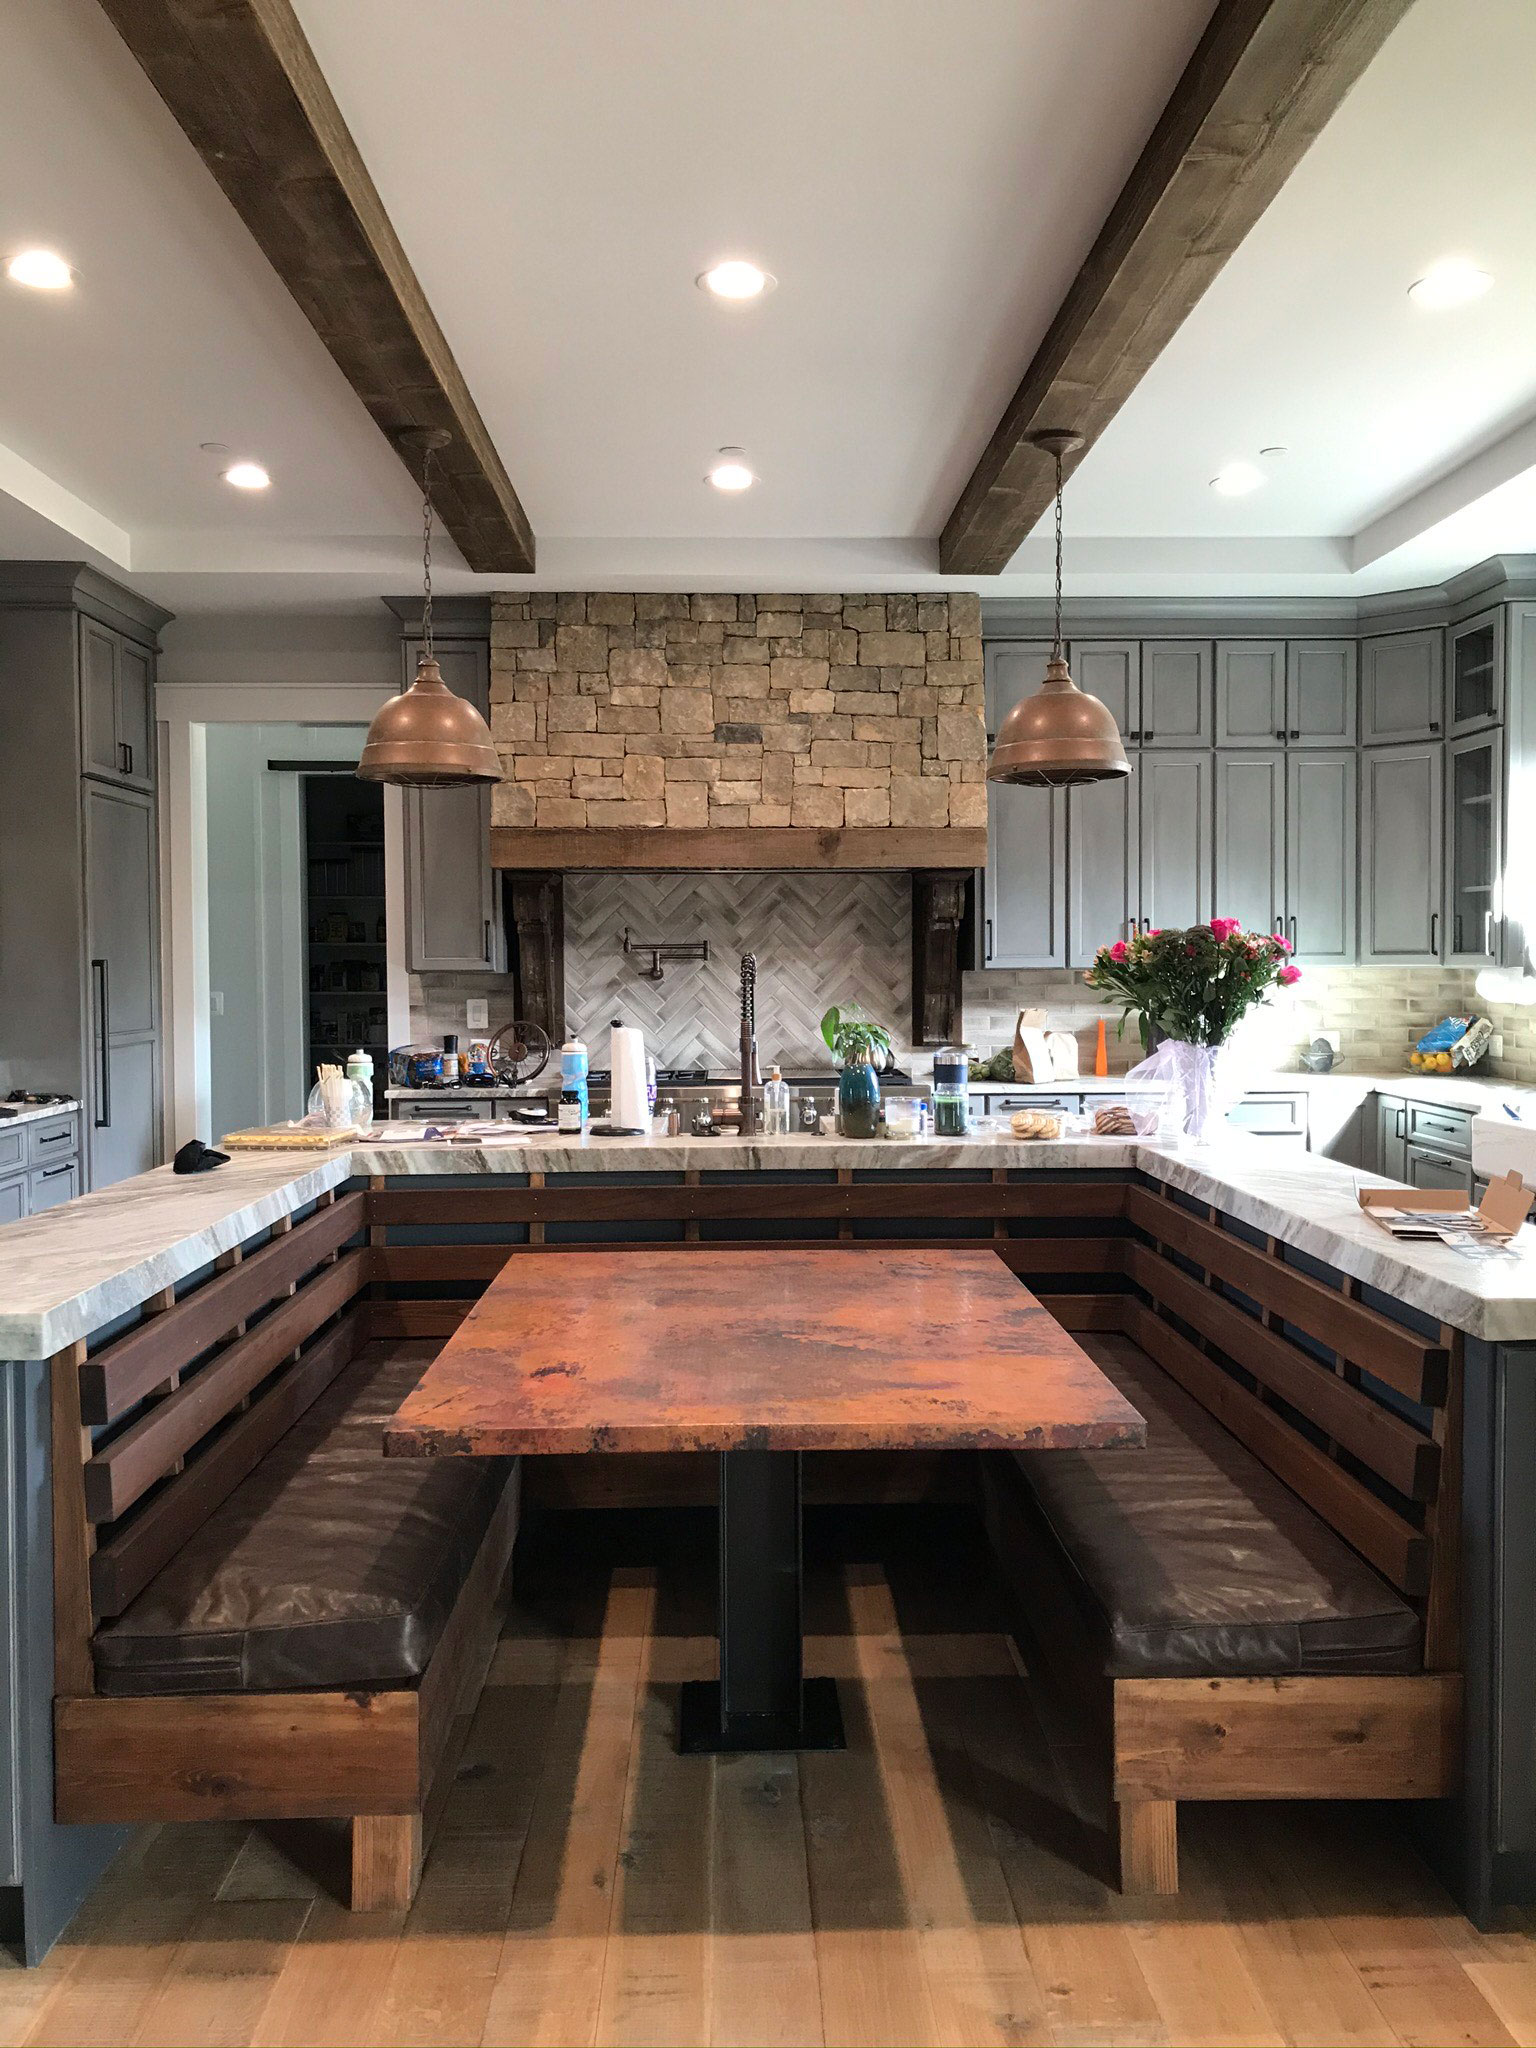 Mind-blowing tuscan kitchen with white cabinets, marble countertops, brick backsplash, the focal point is a sleek range hood